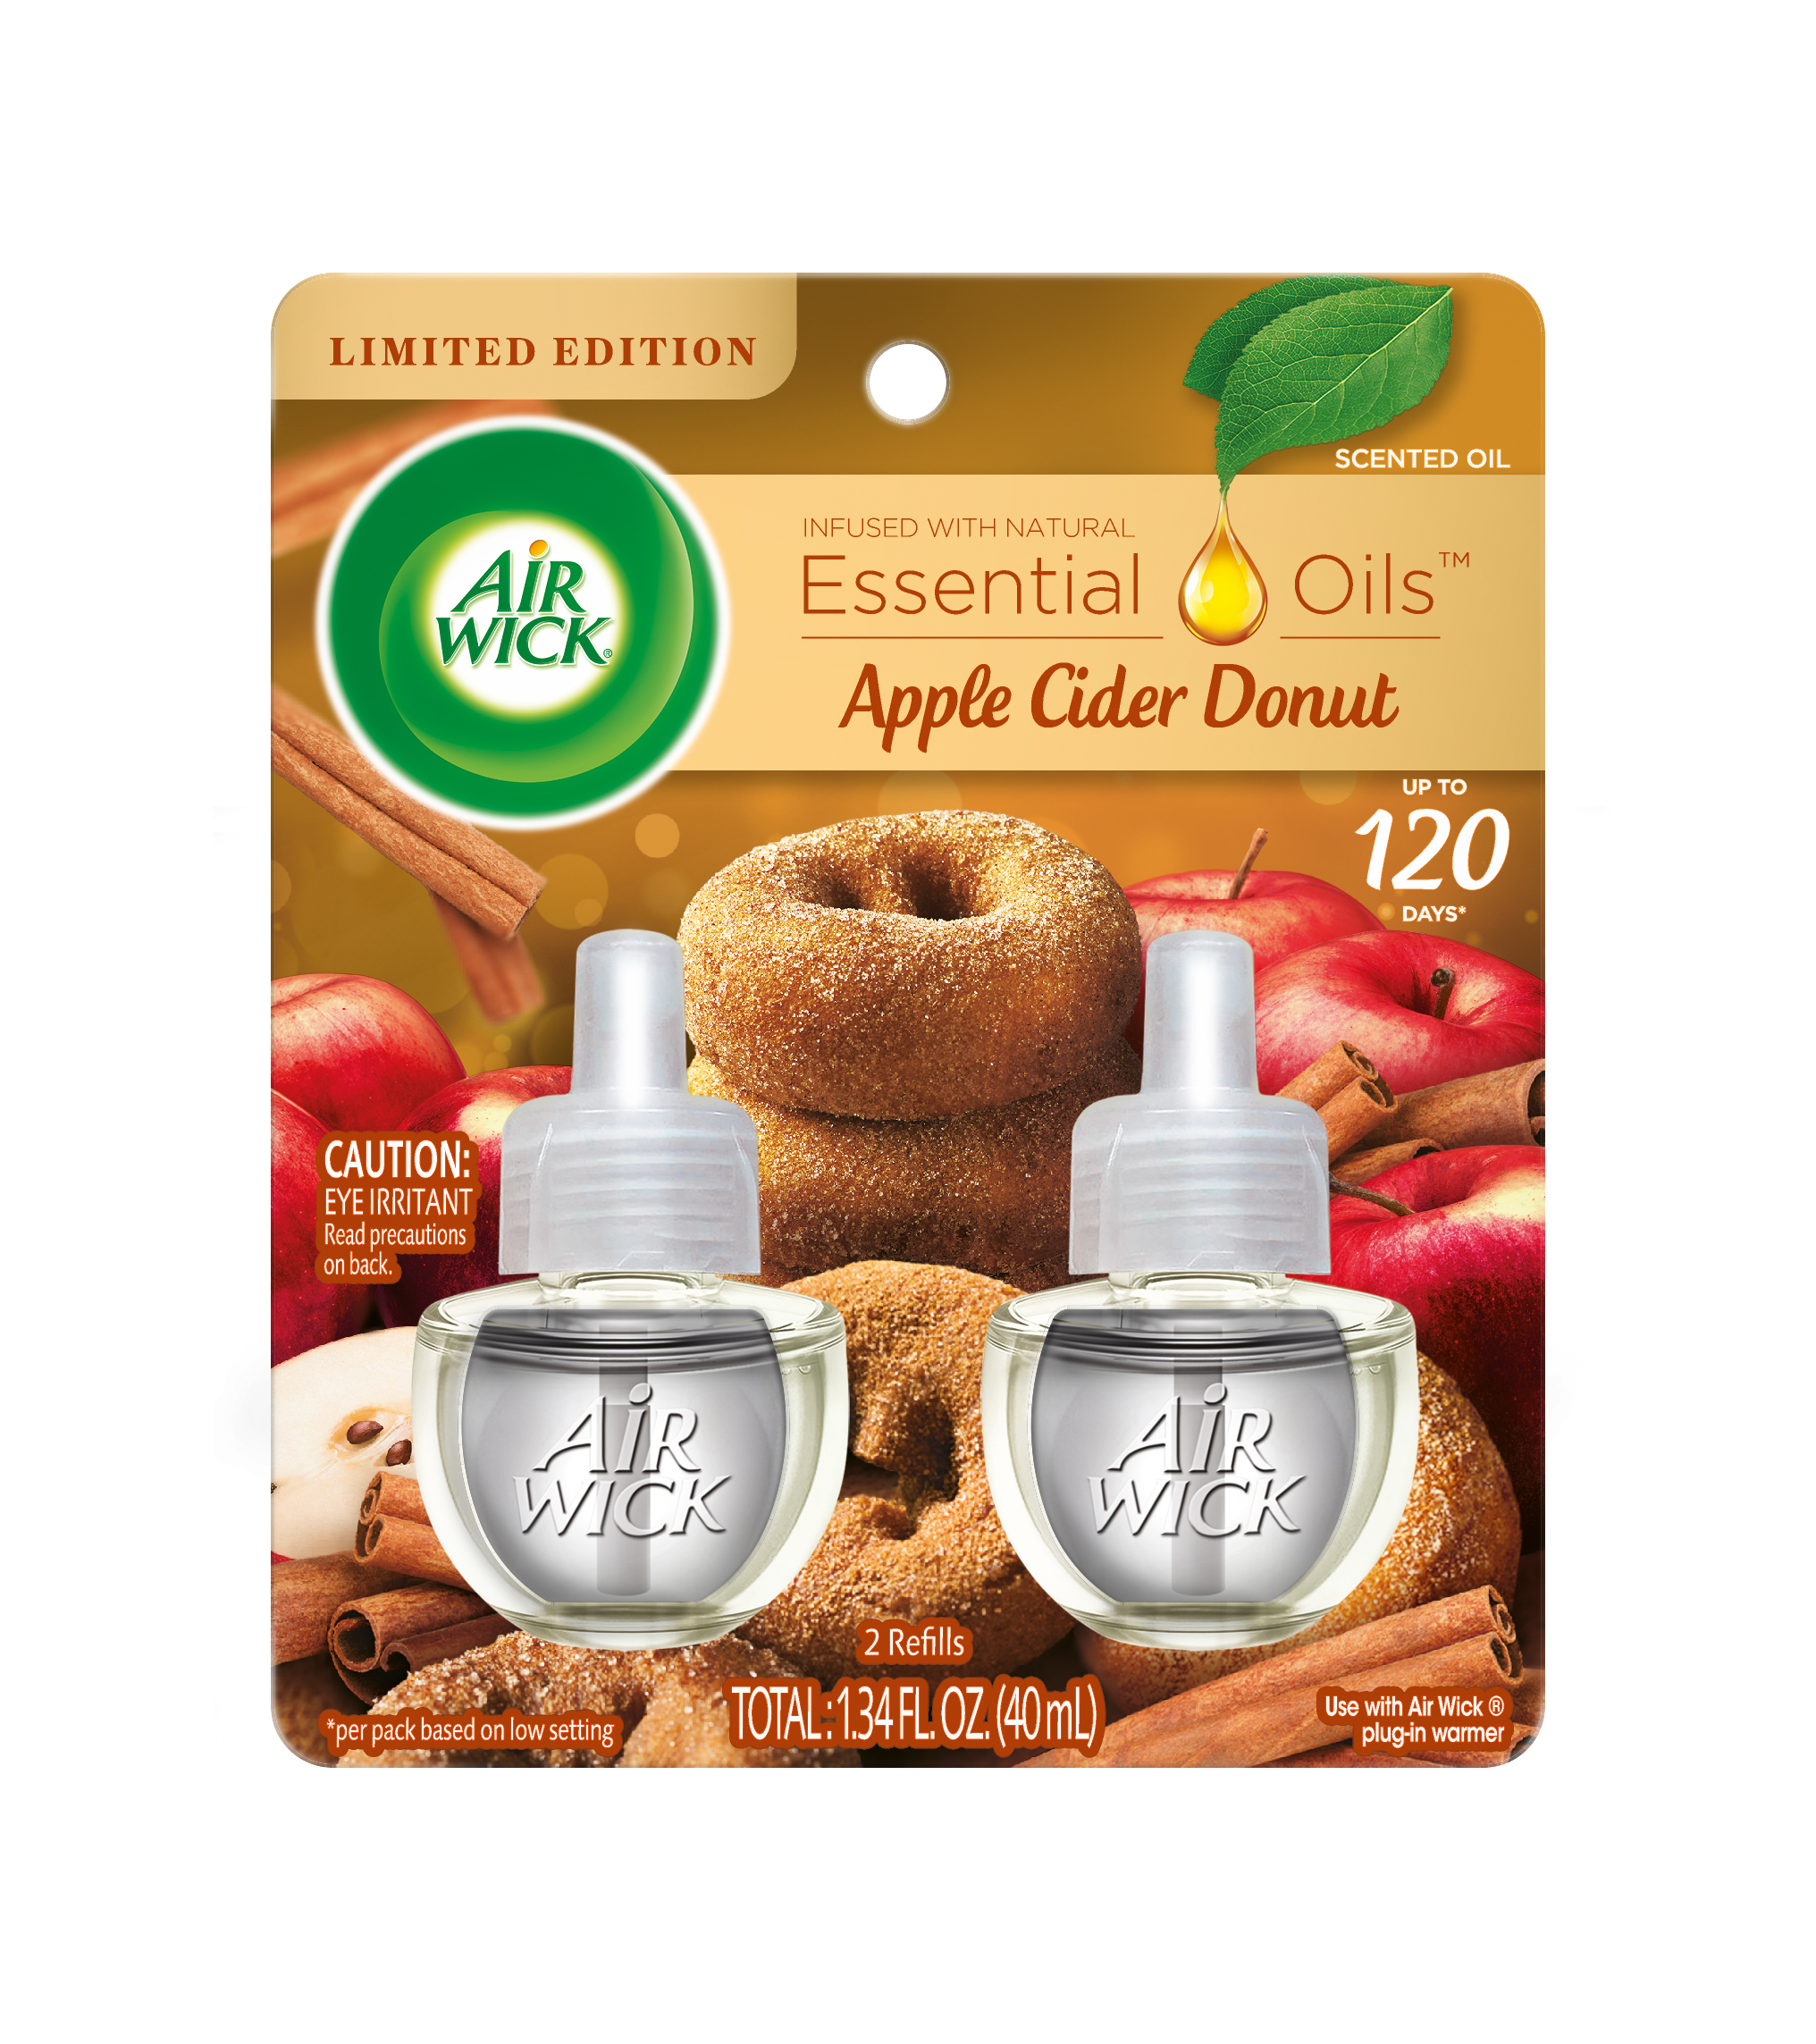 AIR WICK Scented Oil  Apple Cider Donut